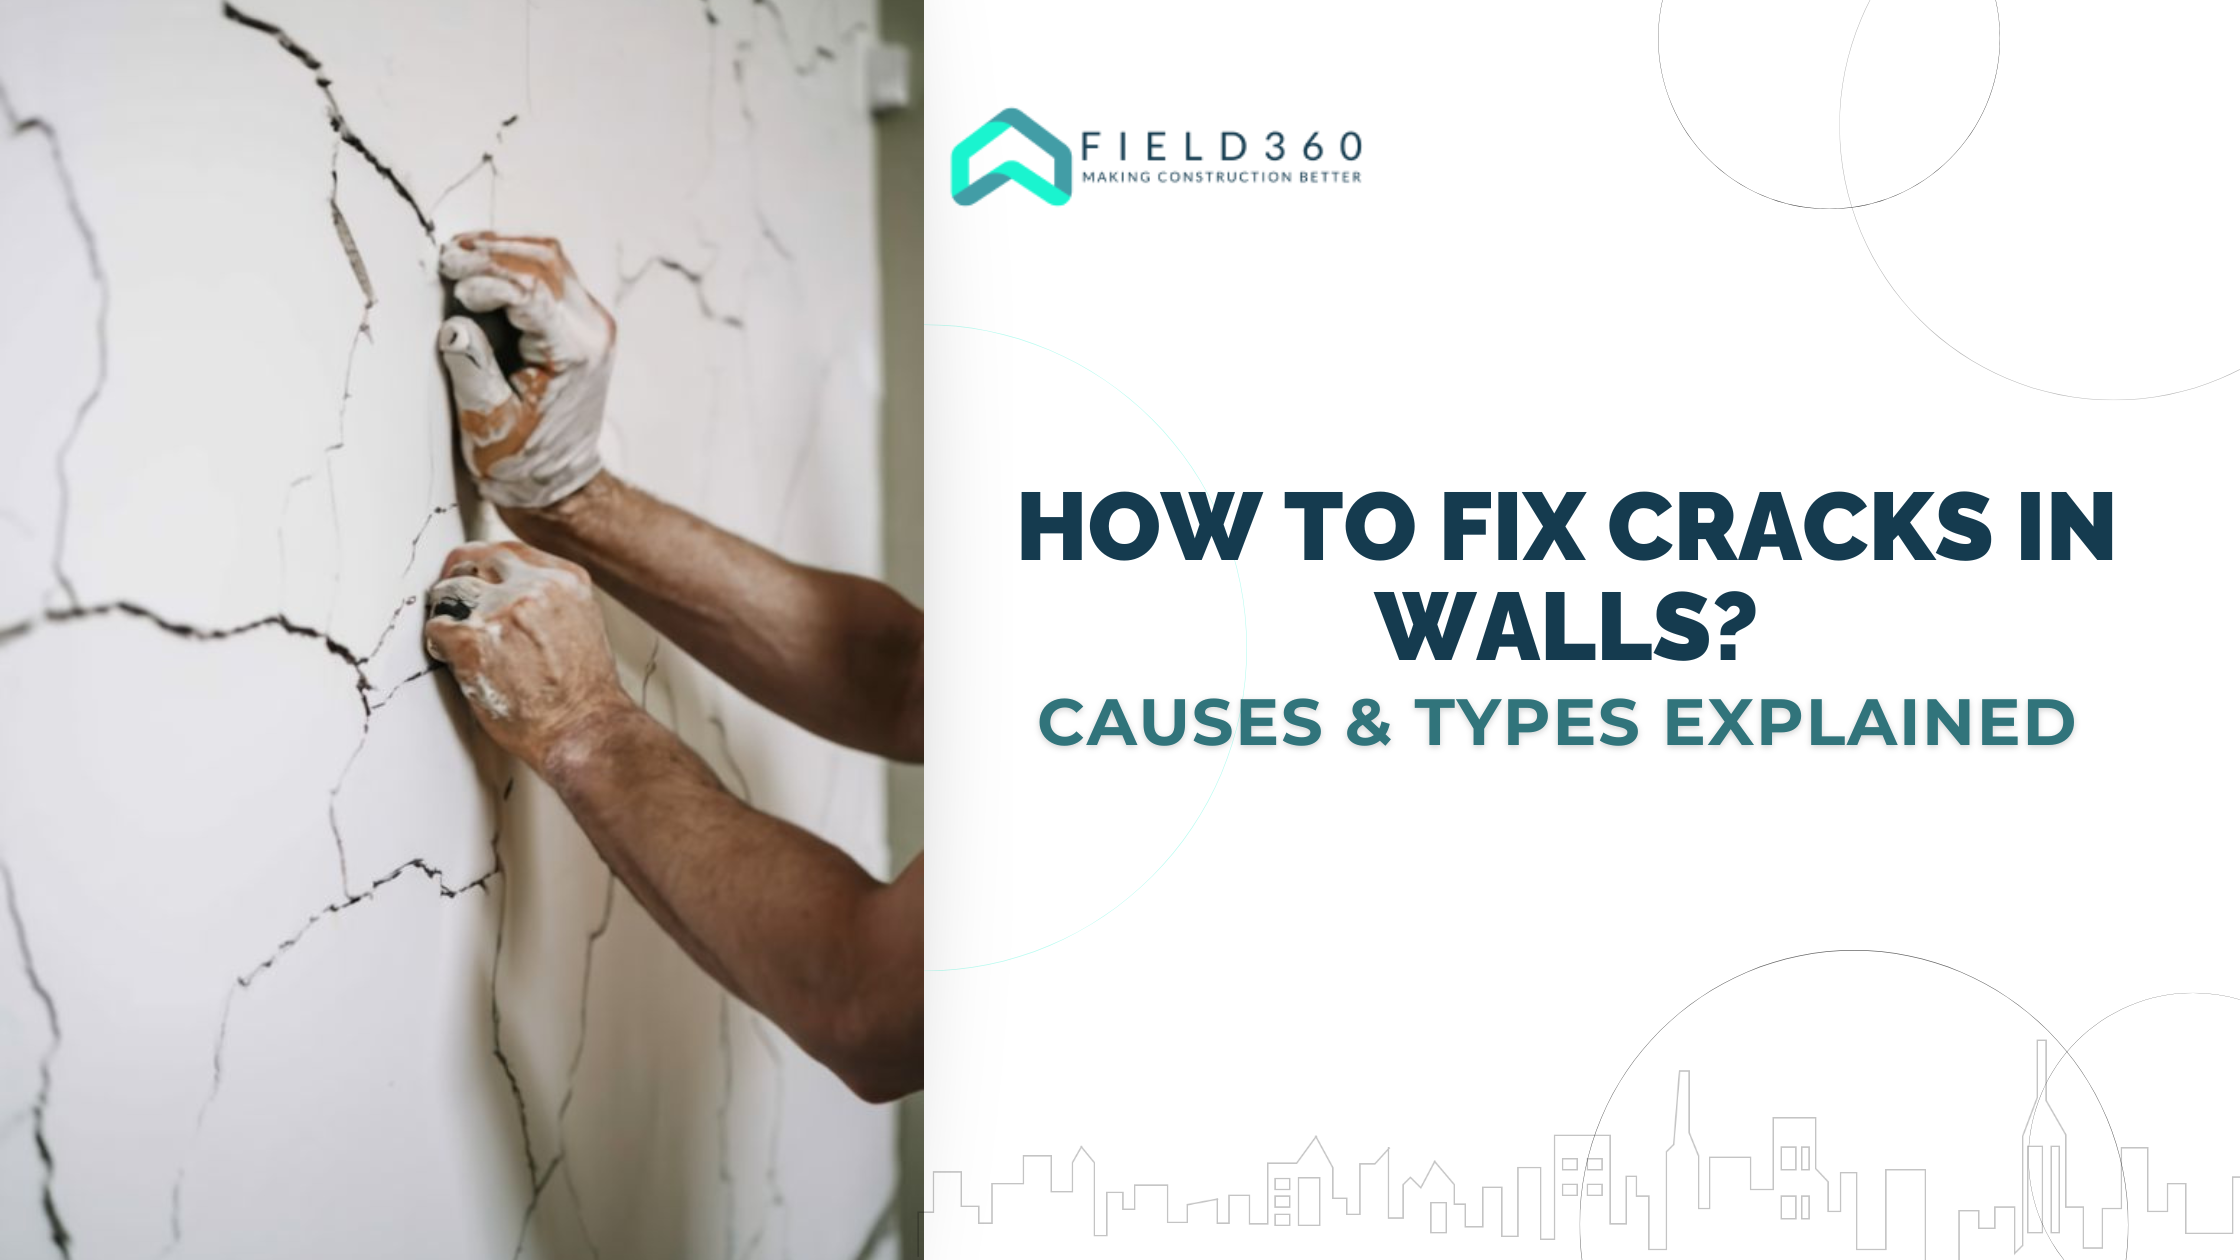 How to Fix Cracks in Walls? Causes and Types of Cracks Explained